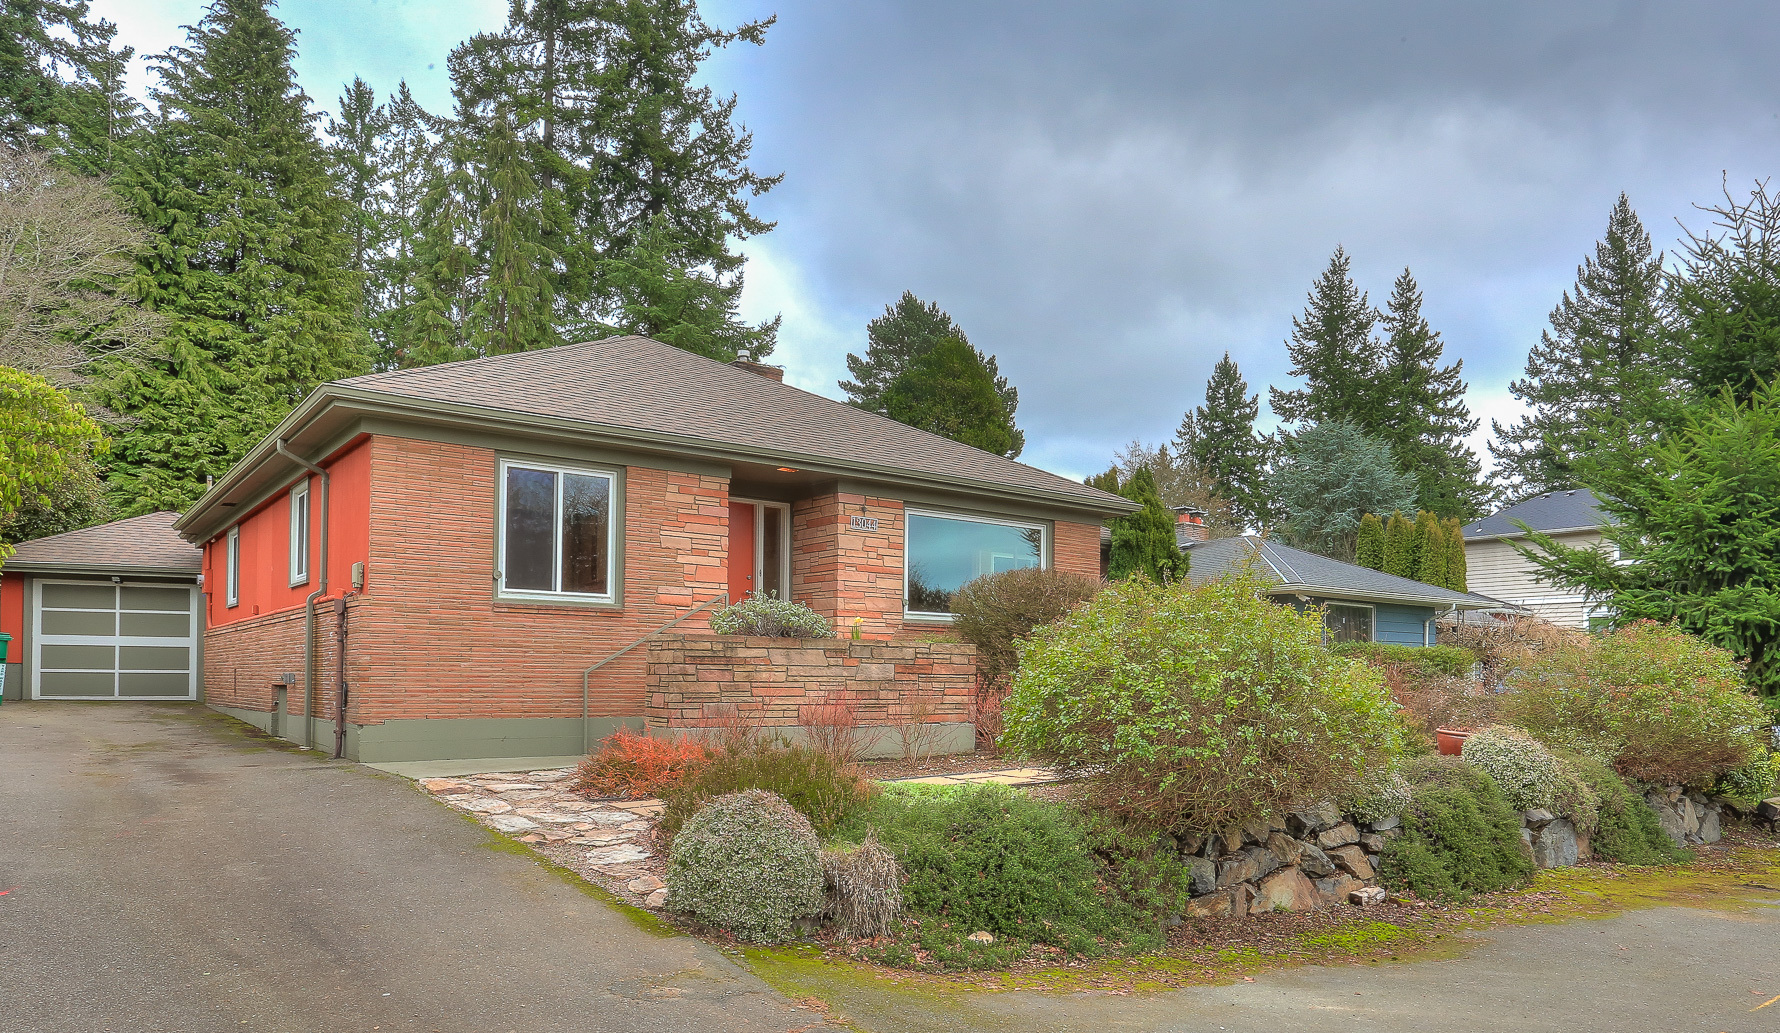 Property Photo: Cape Cod in Broadview 13044 7th Ave NW  WA 98177 